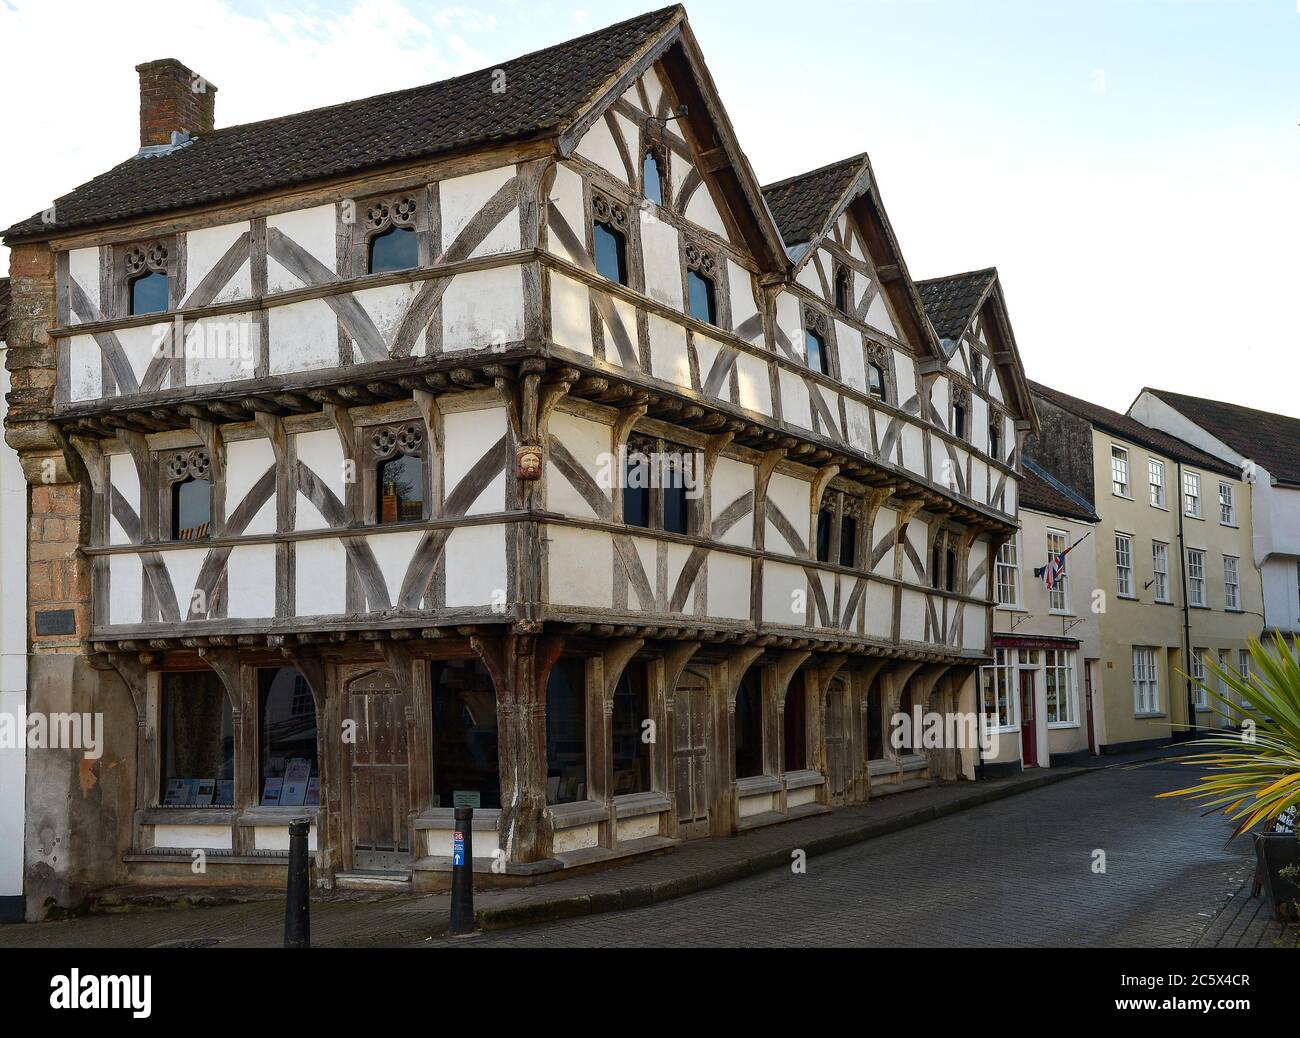 Early English timber frame building.  Formerly wool merchants and medieval shops.  This building built in 1460 on site of a former building built 1340. Stock Photo